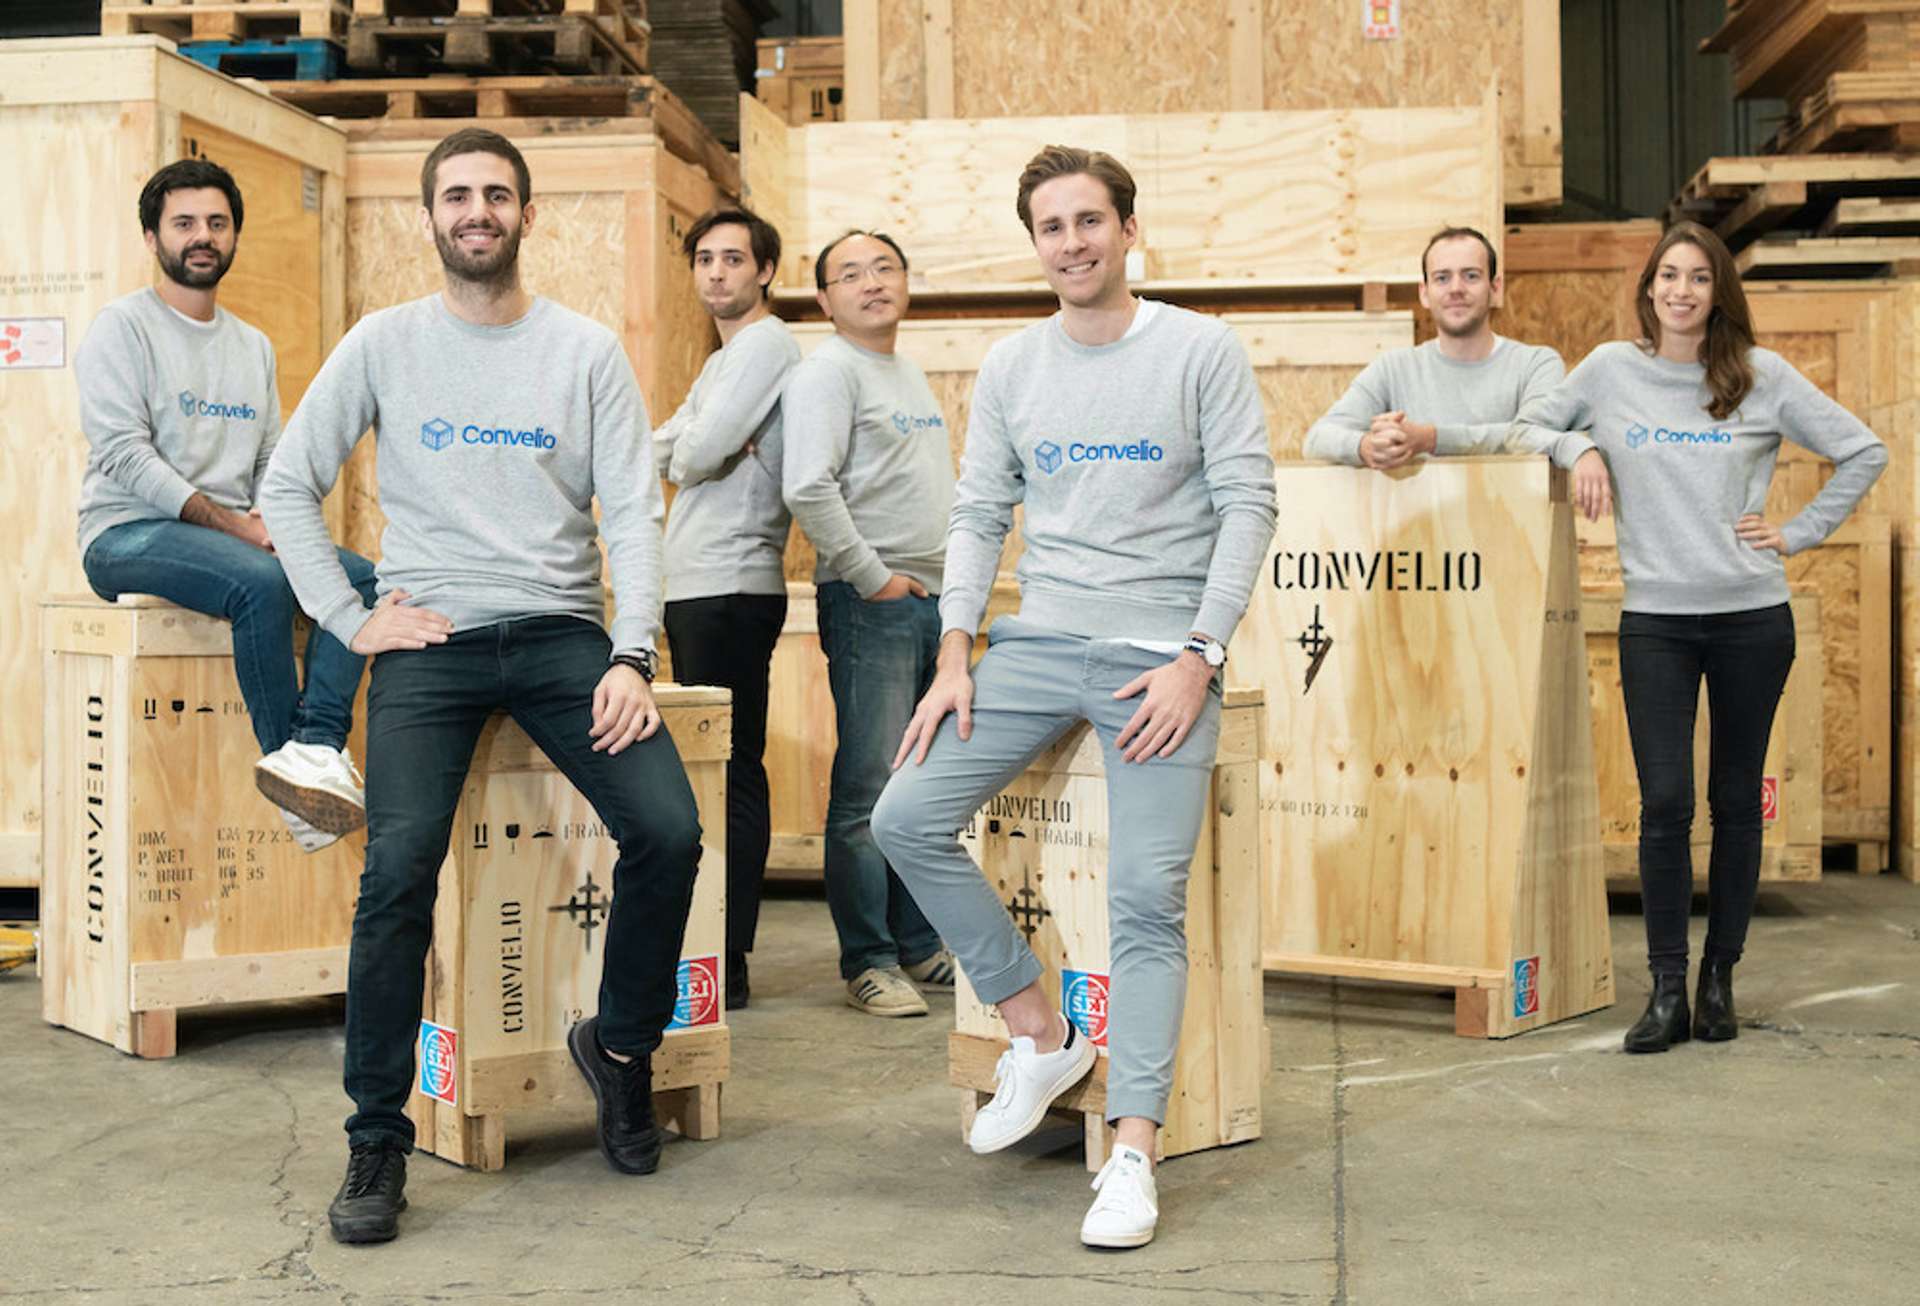 A photograph showing the team of art logistics company Convelio, all wearing a grey sweatshirt with the company name and logo, leaning against shipping crates.